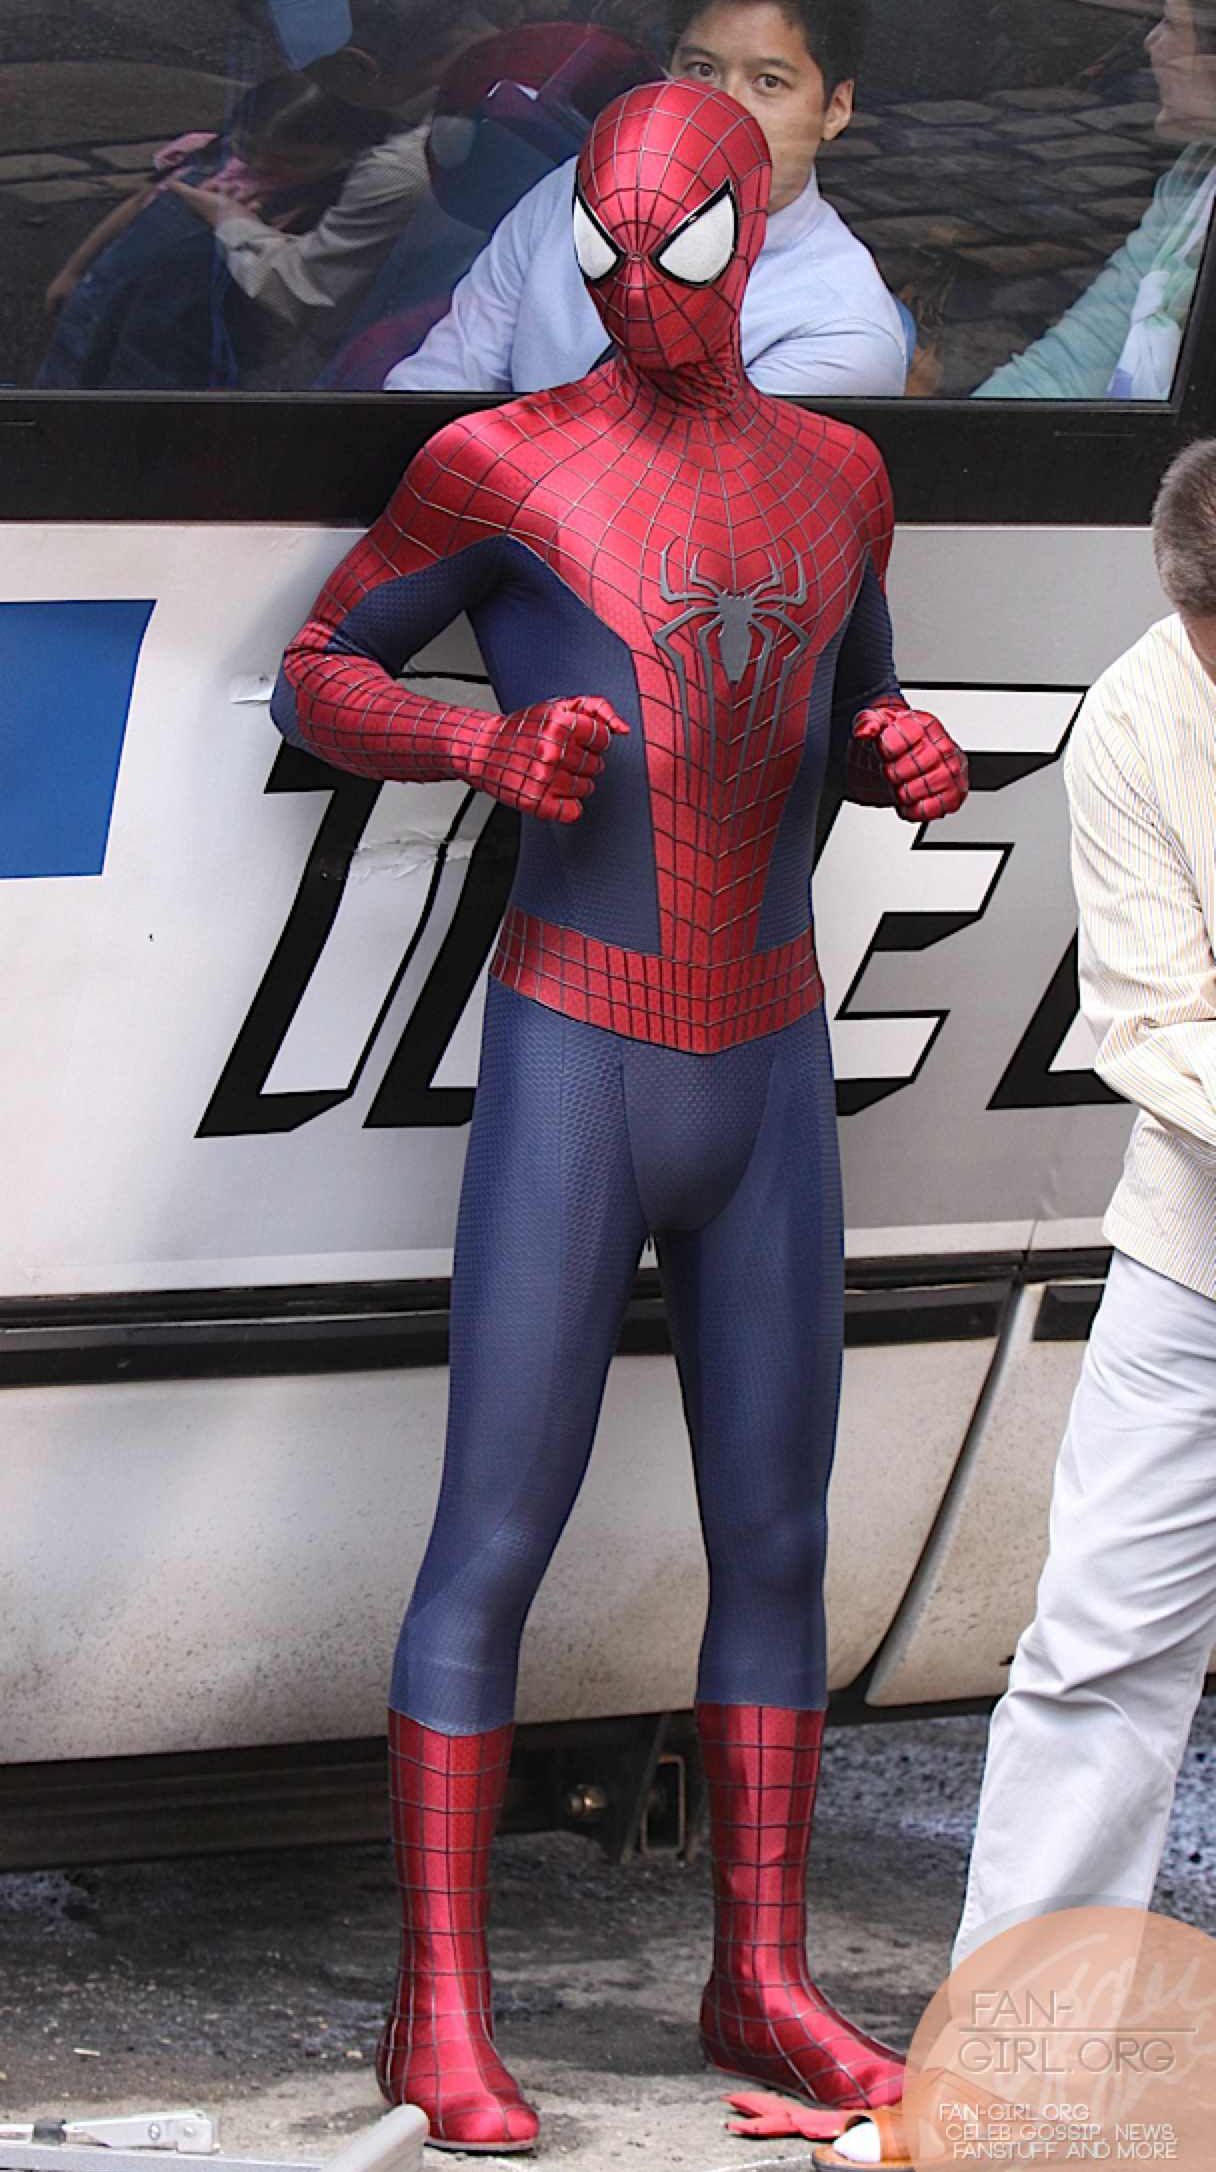 On the set of The Amazing Spider-Man 2